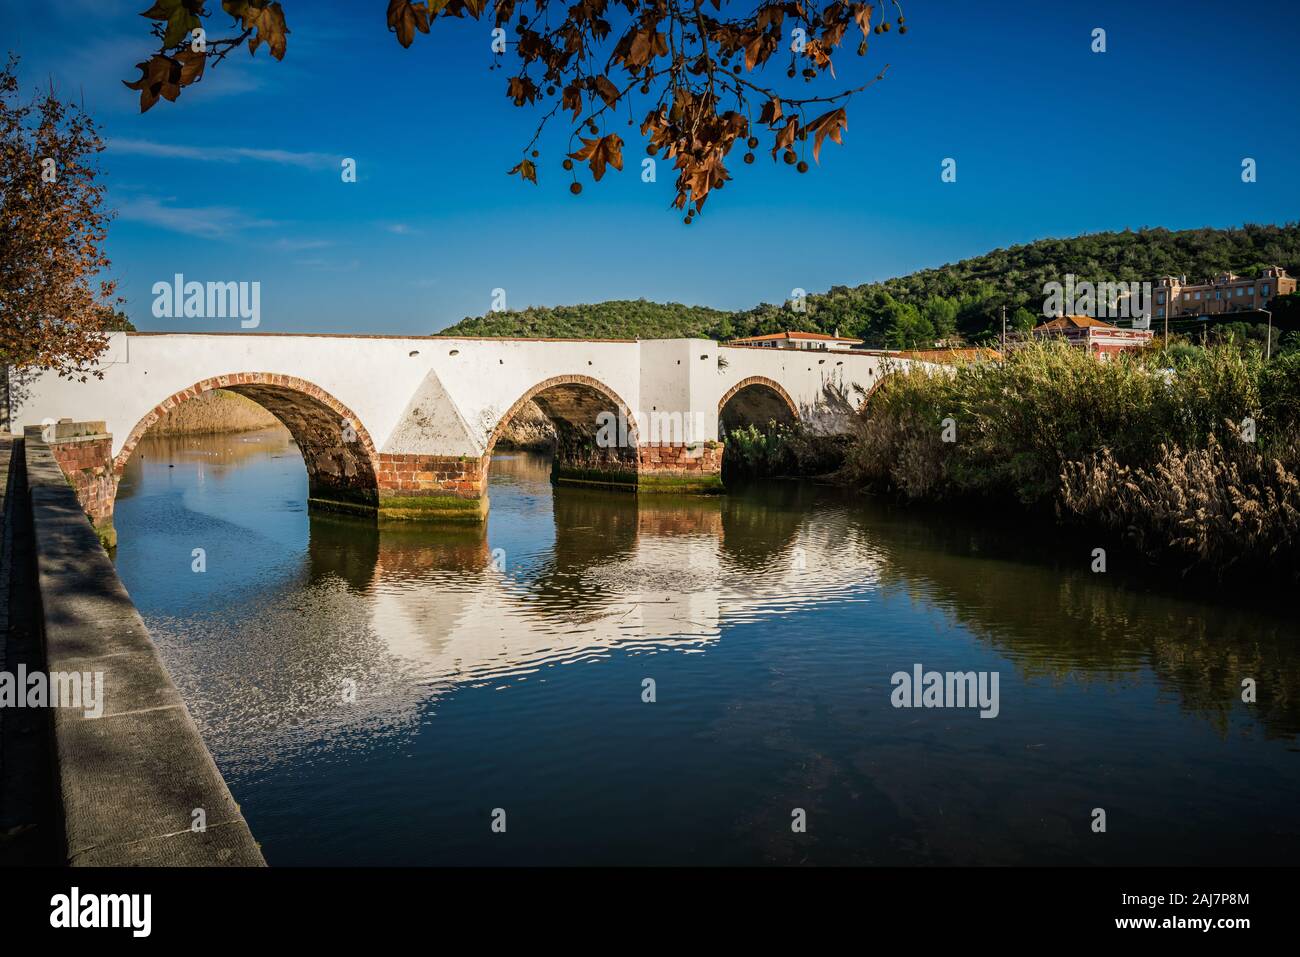 Sunlight and reflections of the Ancient Roman bridge over the River Arade in Silves, Algarve Portugal. Photograph: Tony Taylor Stock Photo